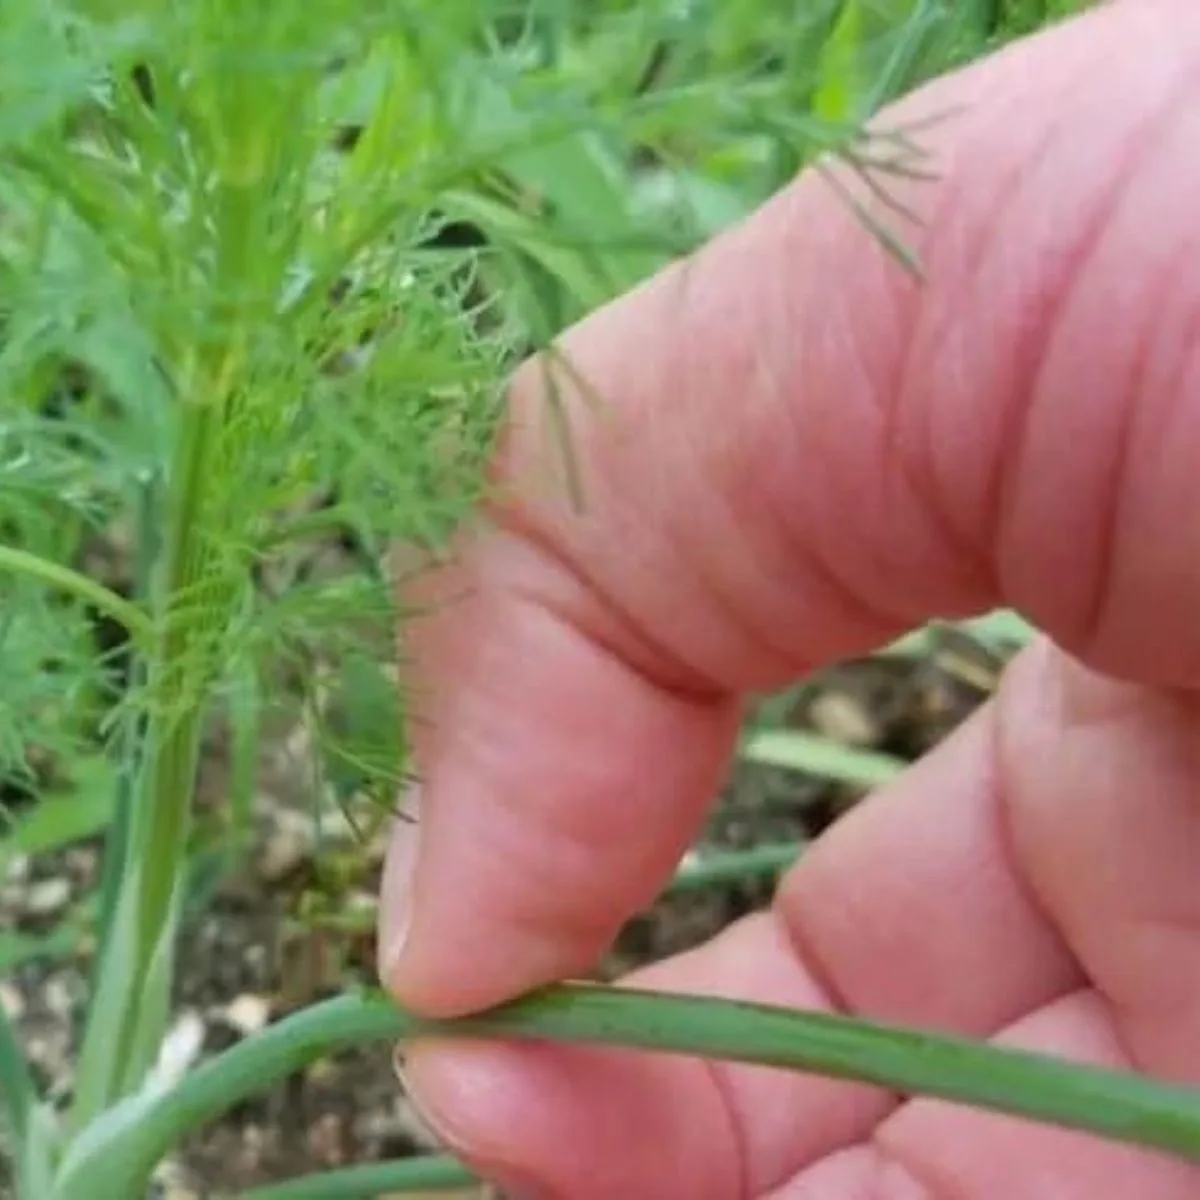 Harvesting dill by hand pinching.